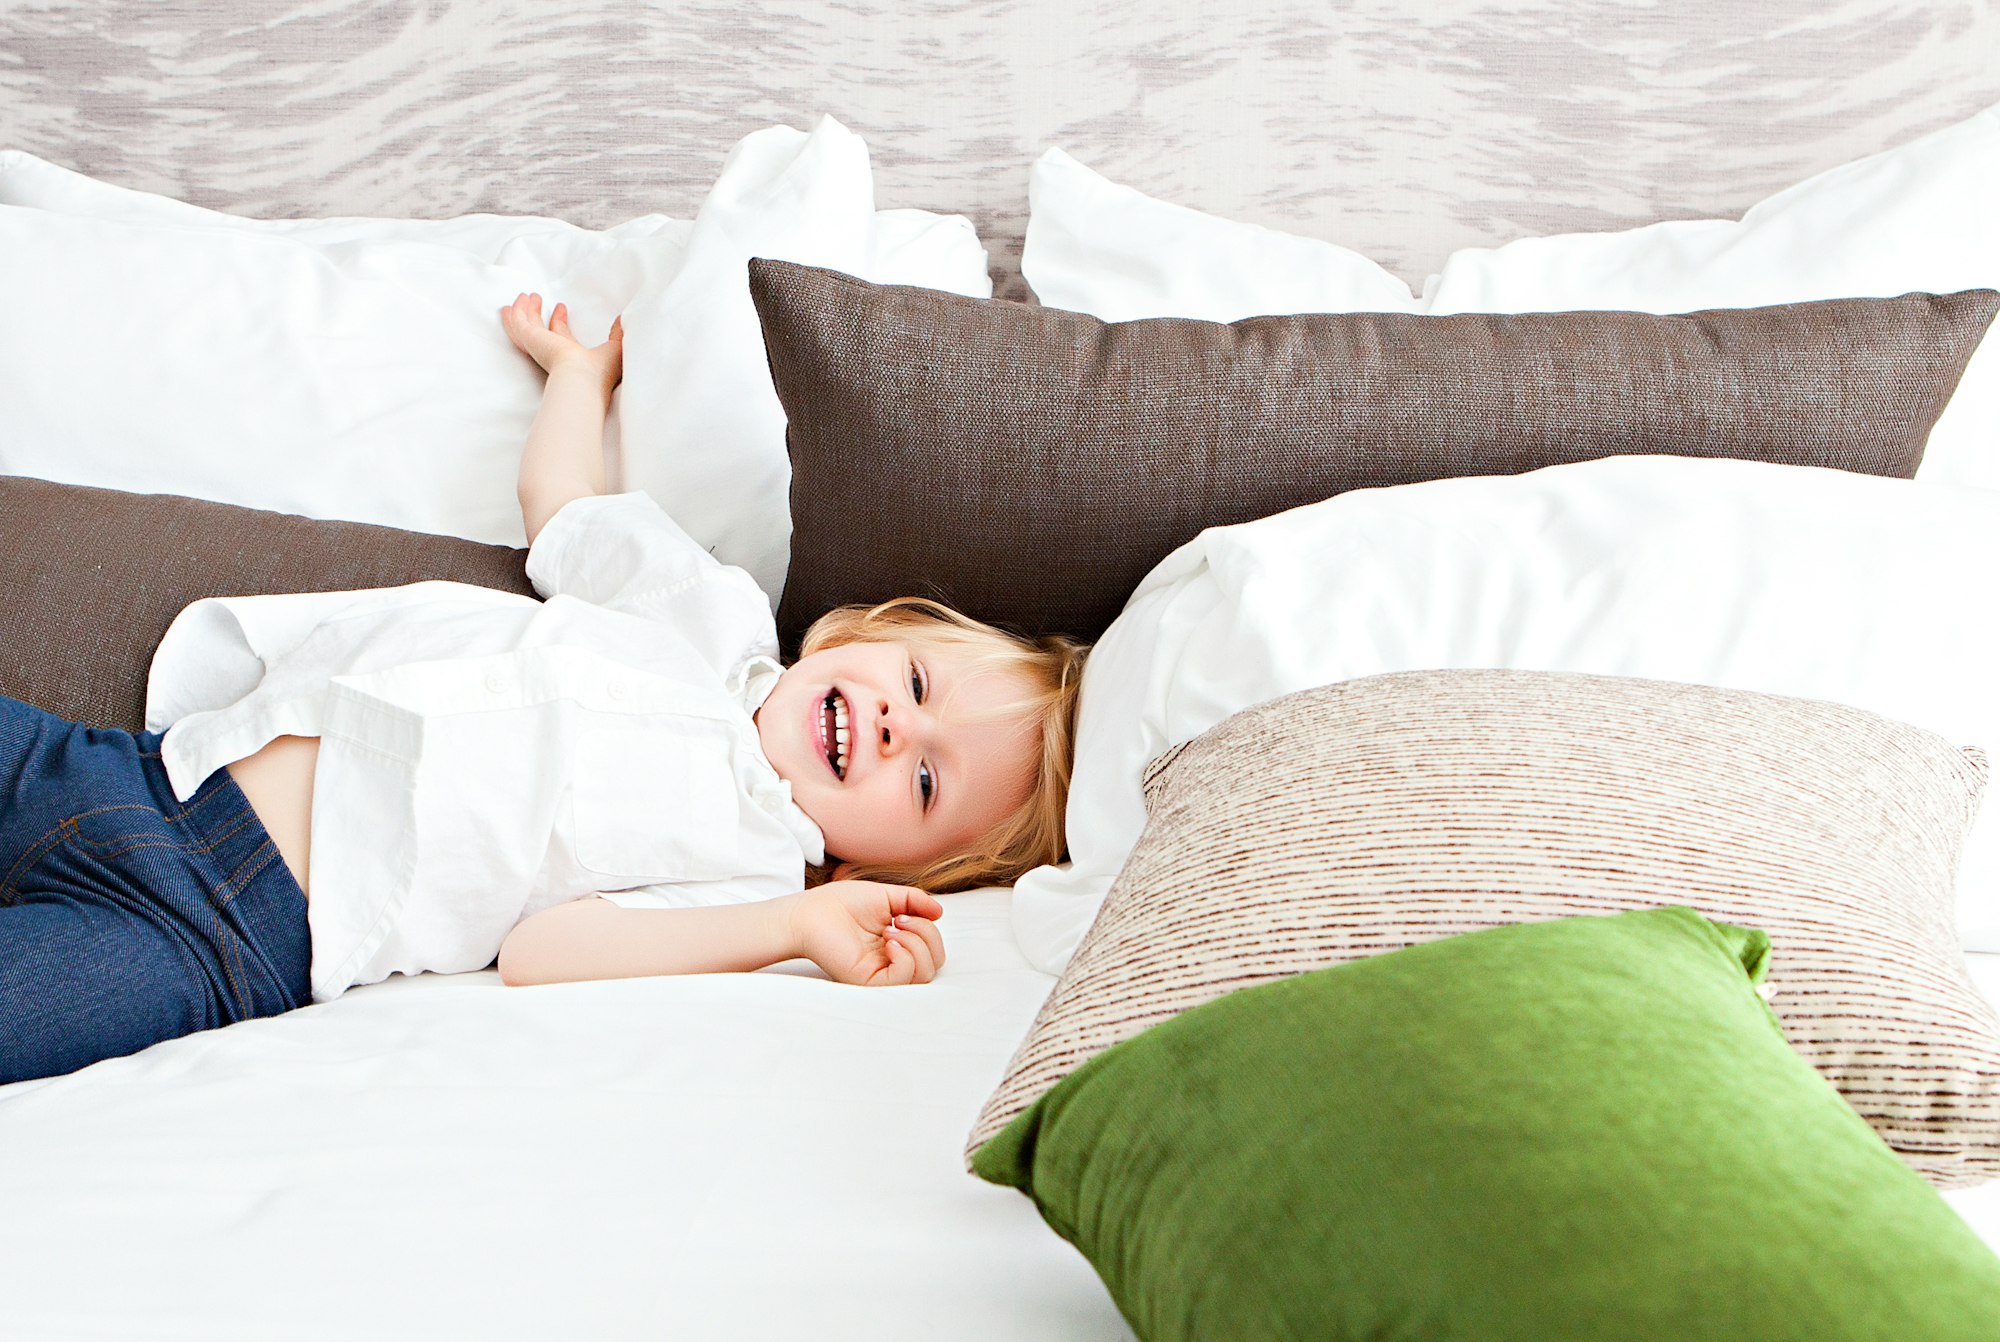 This image was taken for my client, Nannybird—an LA-based nanny service. I shot at a chic hotel in Hollywood and lucked out with the all-white walls that served as a fabulous bounce card for the floor to ceiling windows that had gorgeous afternoon light streaming in. The child had an absolute blast knocking down all of the pillows on the perfectly-made hotel bed, and I managed to catch him perfectly in the act.  ; )